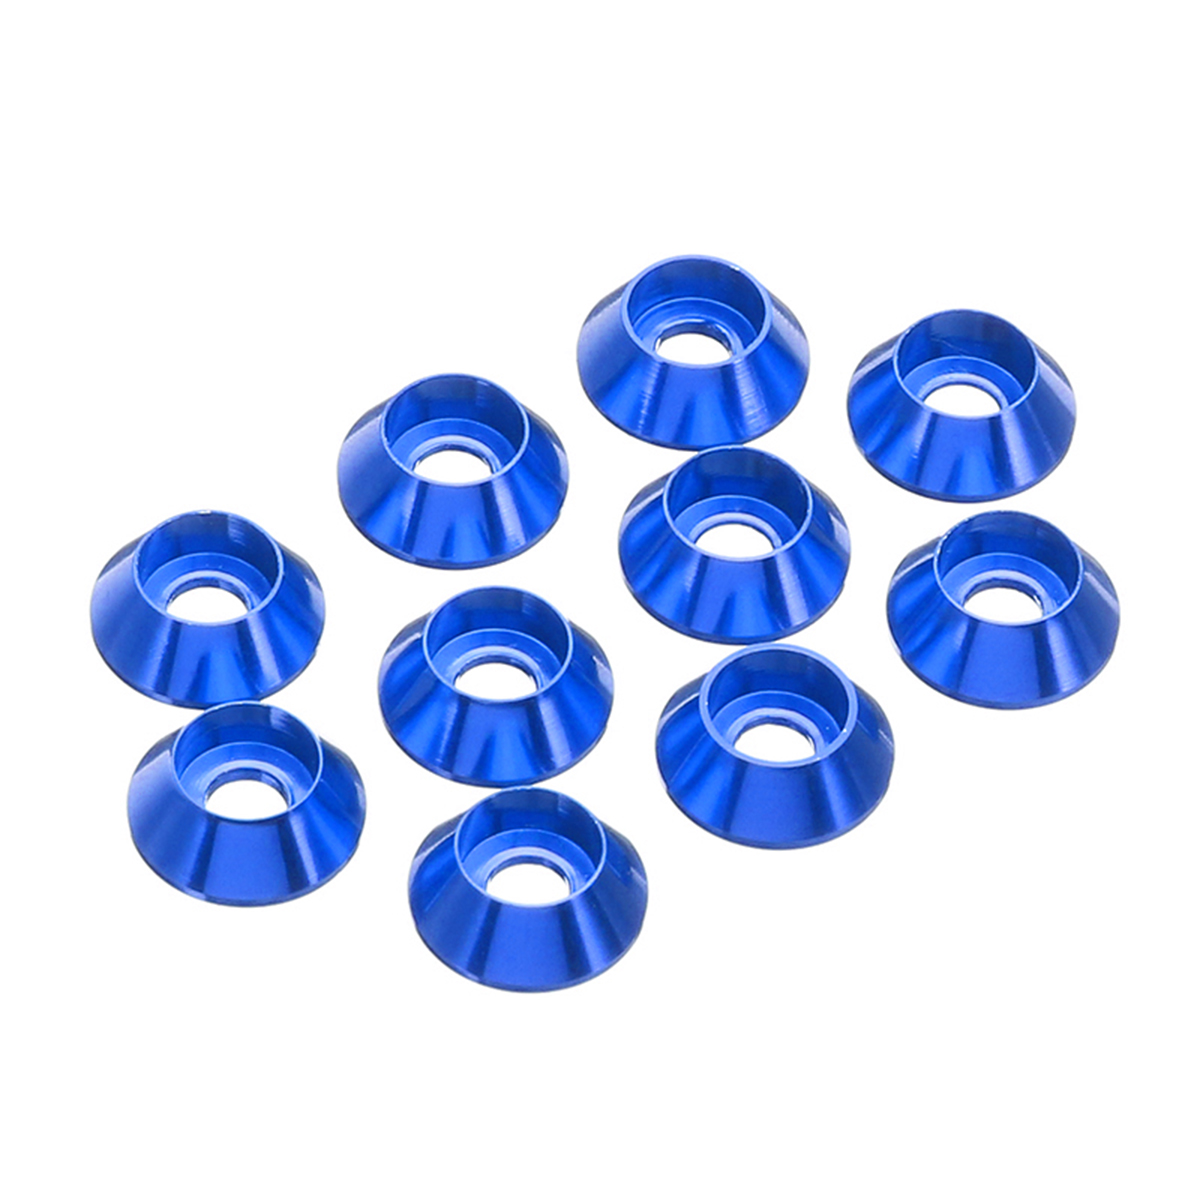 Sulevetrade-M5AN2-10Pcs-M5-Cup-Head-Hex-Screw-Gasket-Washer-Nuts-Aluminum-Alloy-Multicolor-1535744-9